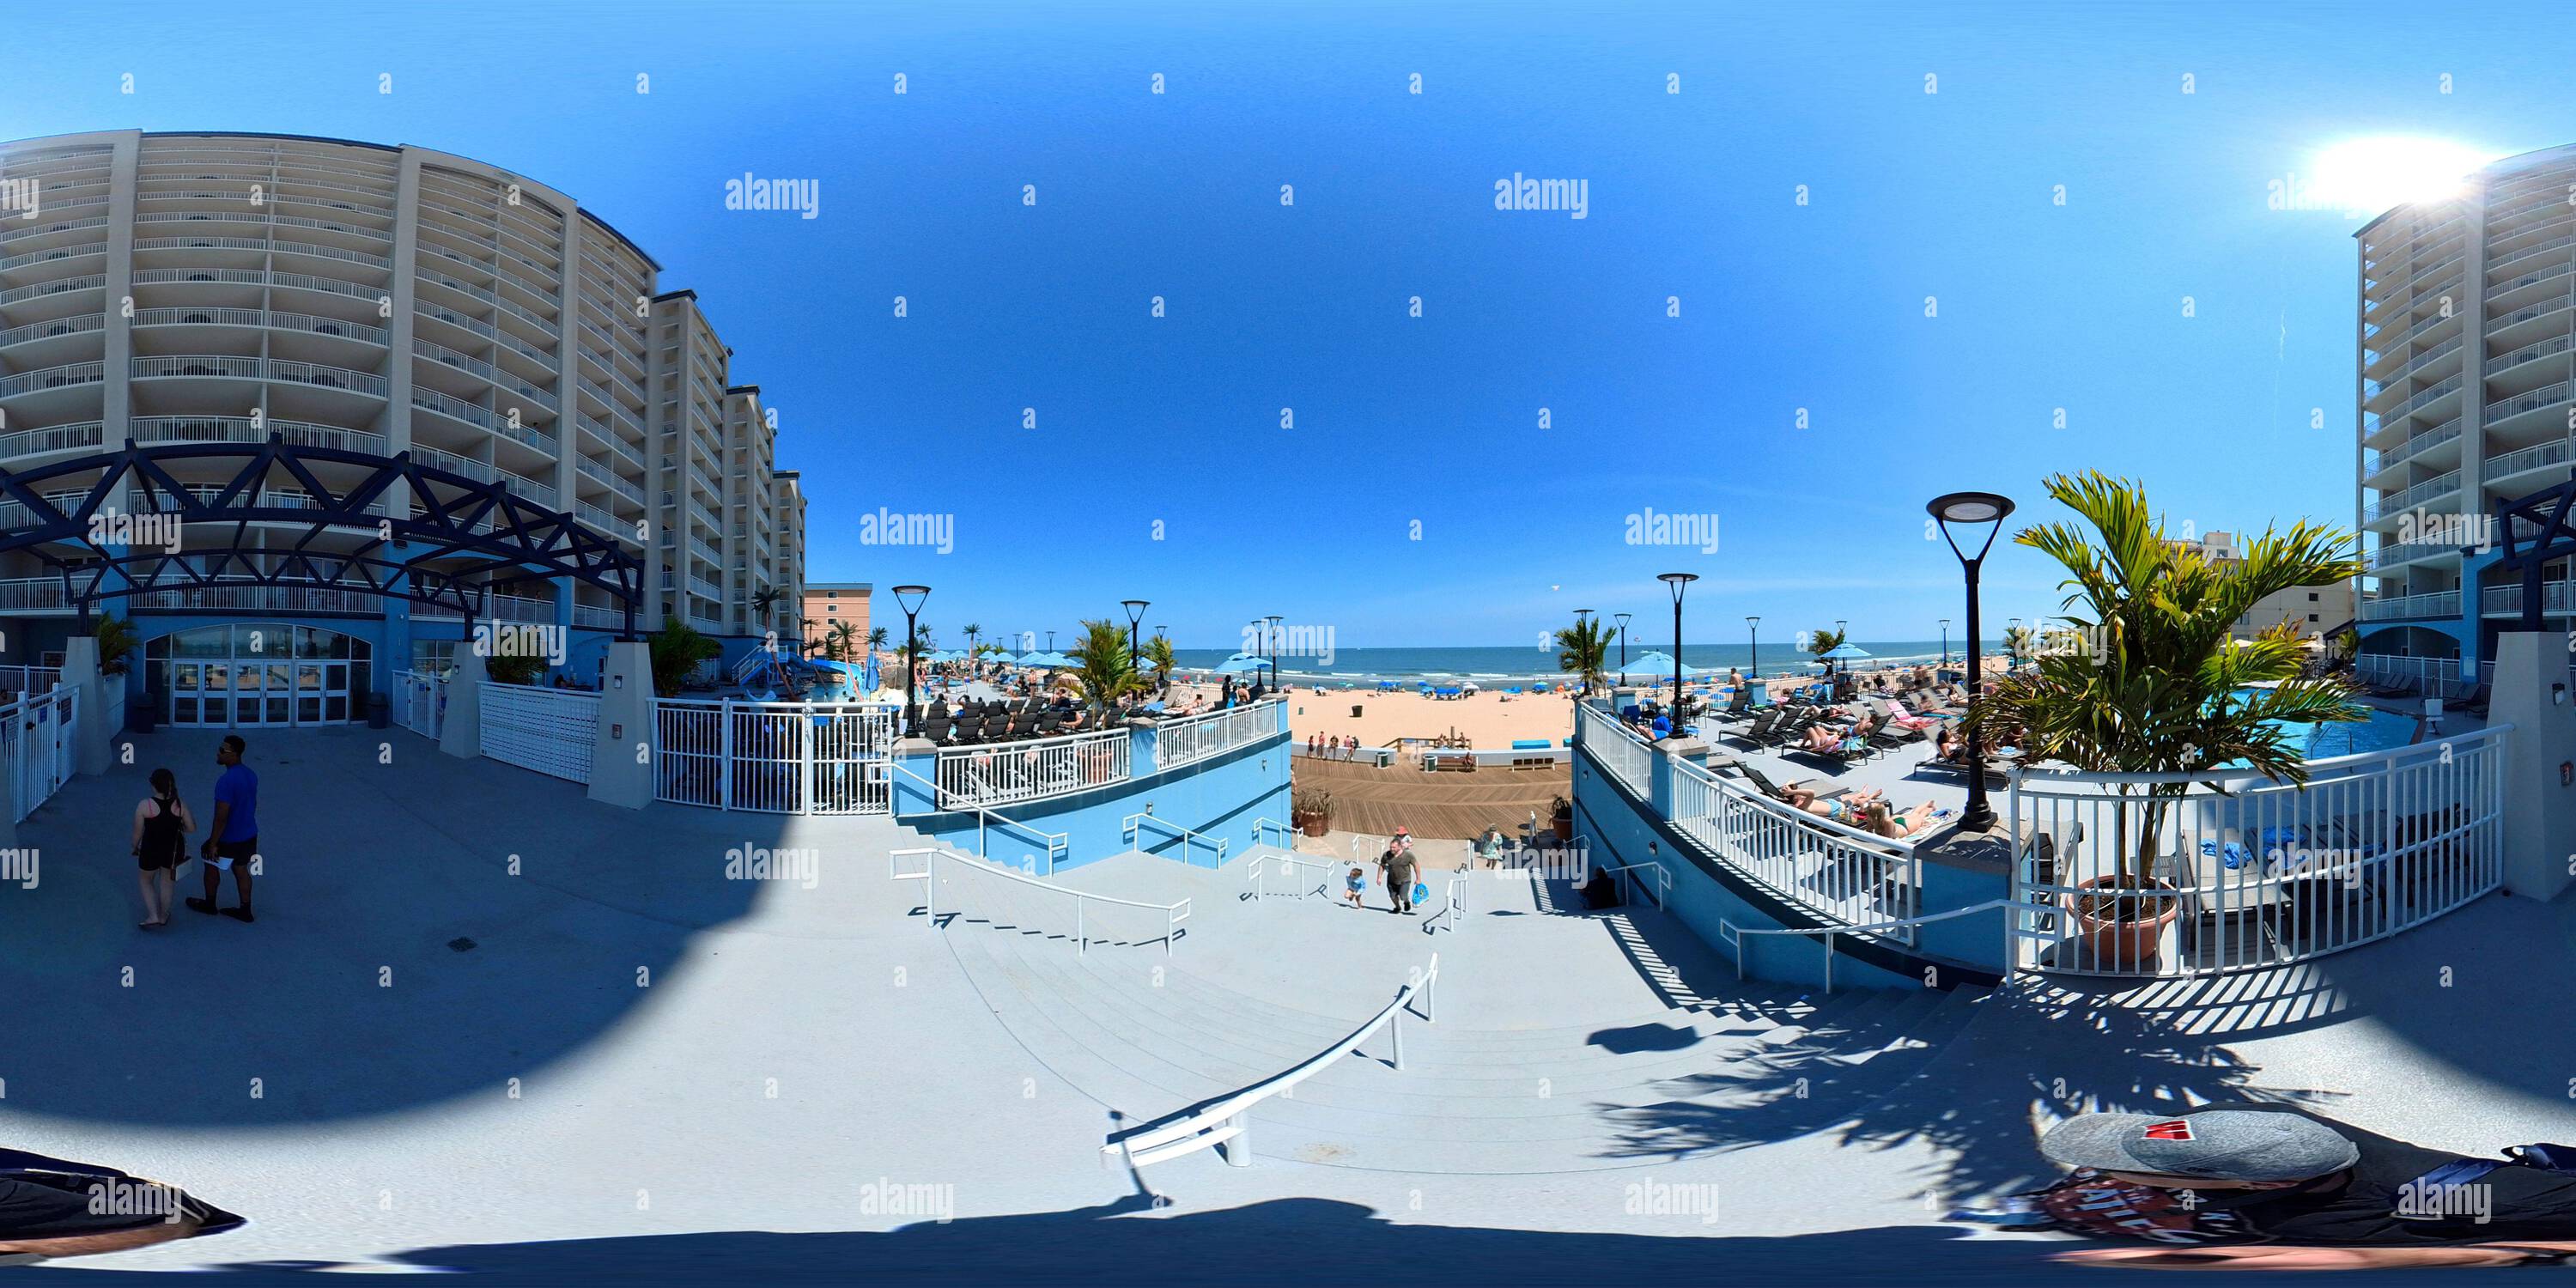 360 degree panoramic view of In front of the Holiday Inn on the Boardwalk in Ocean City, Maryland - 17th Street